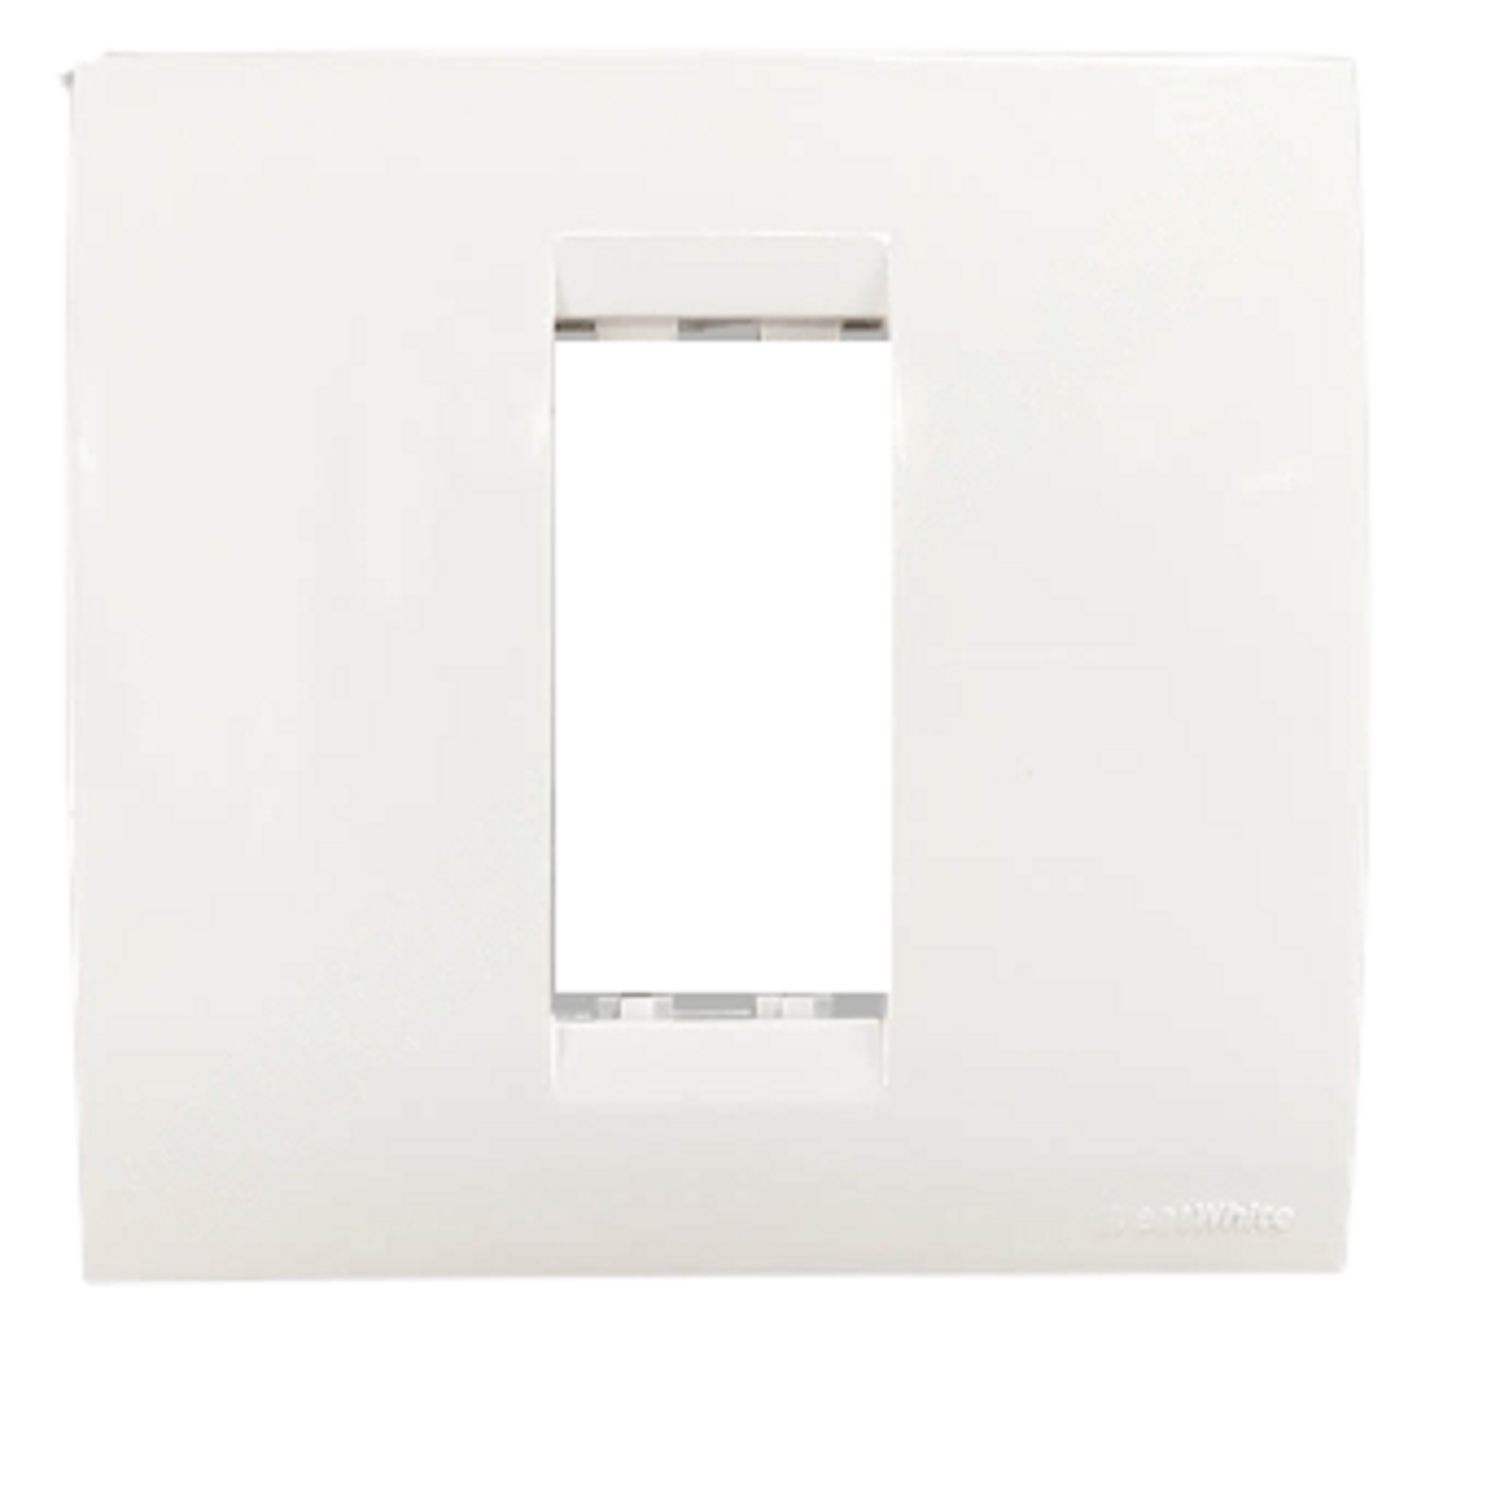 GreatWhite Fiana 1 Module Cover Plate with Base Frame - White